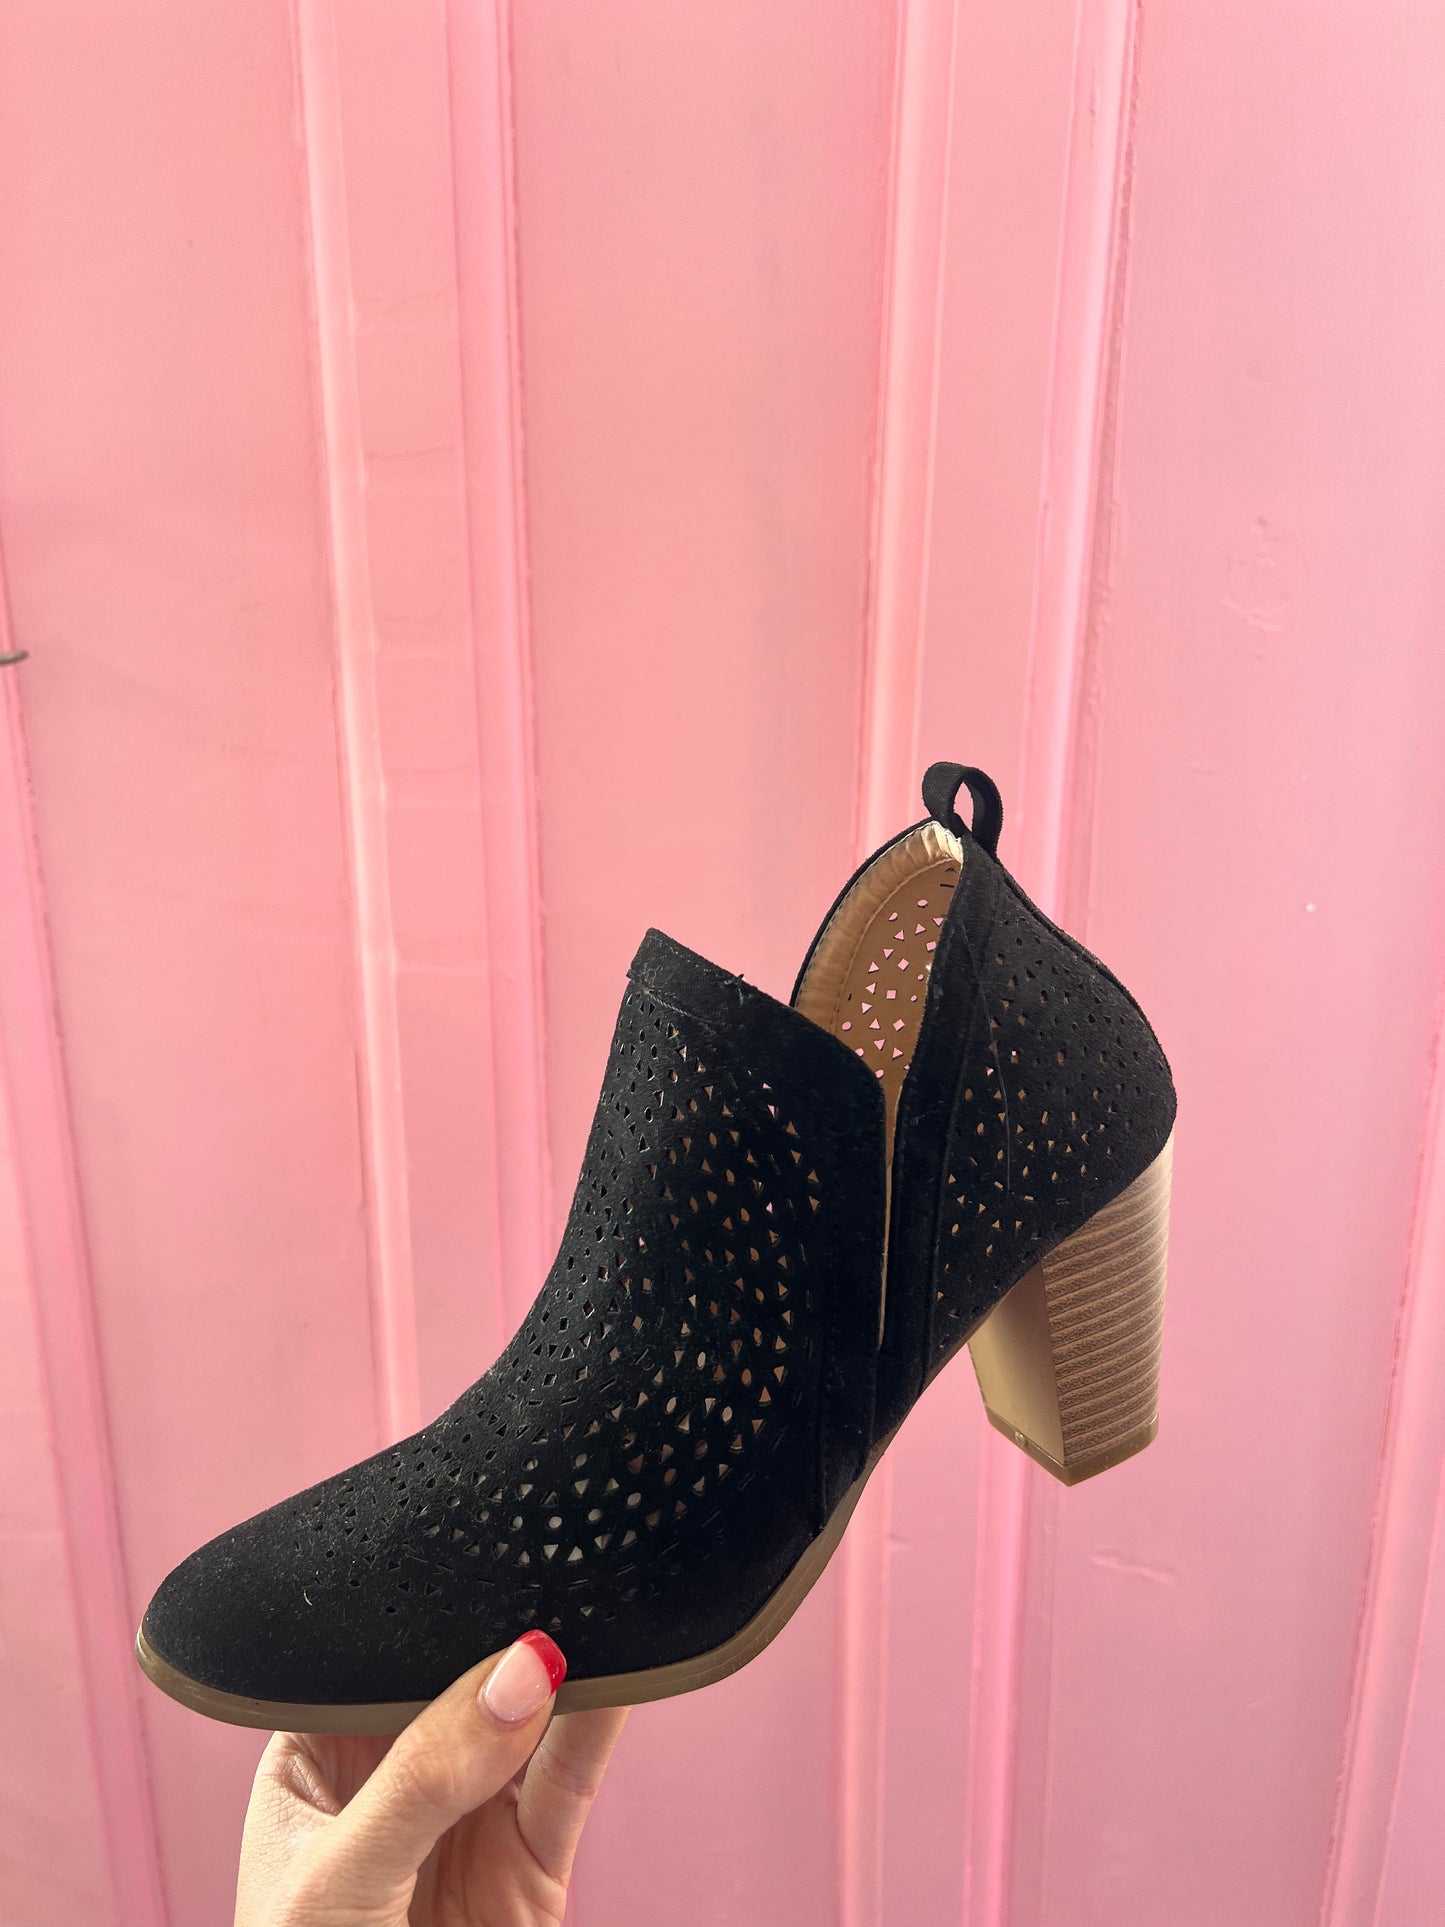 Deal of the Day: Booties